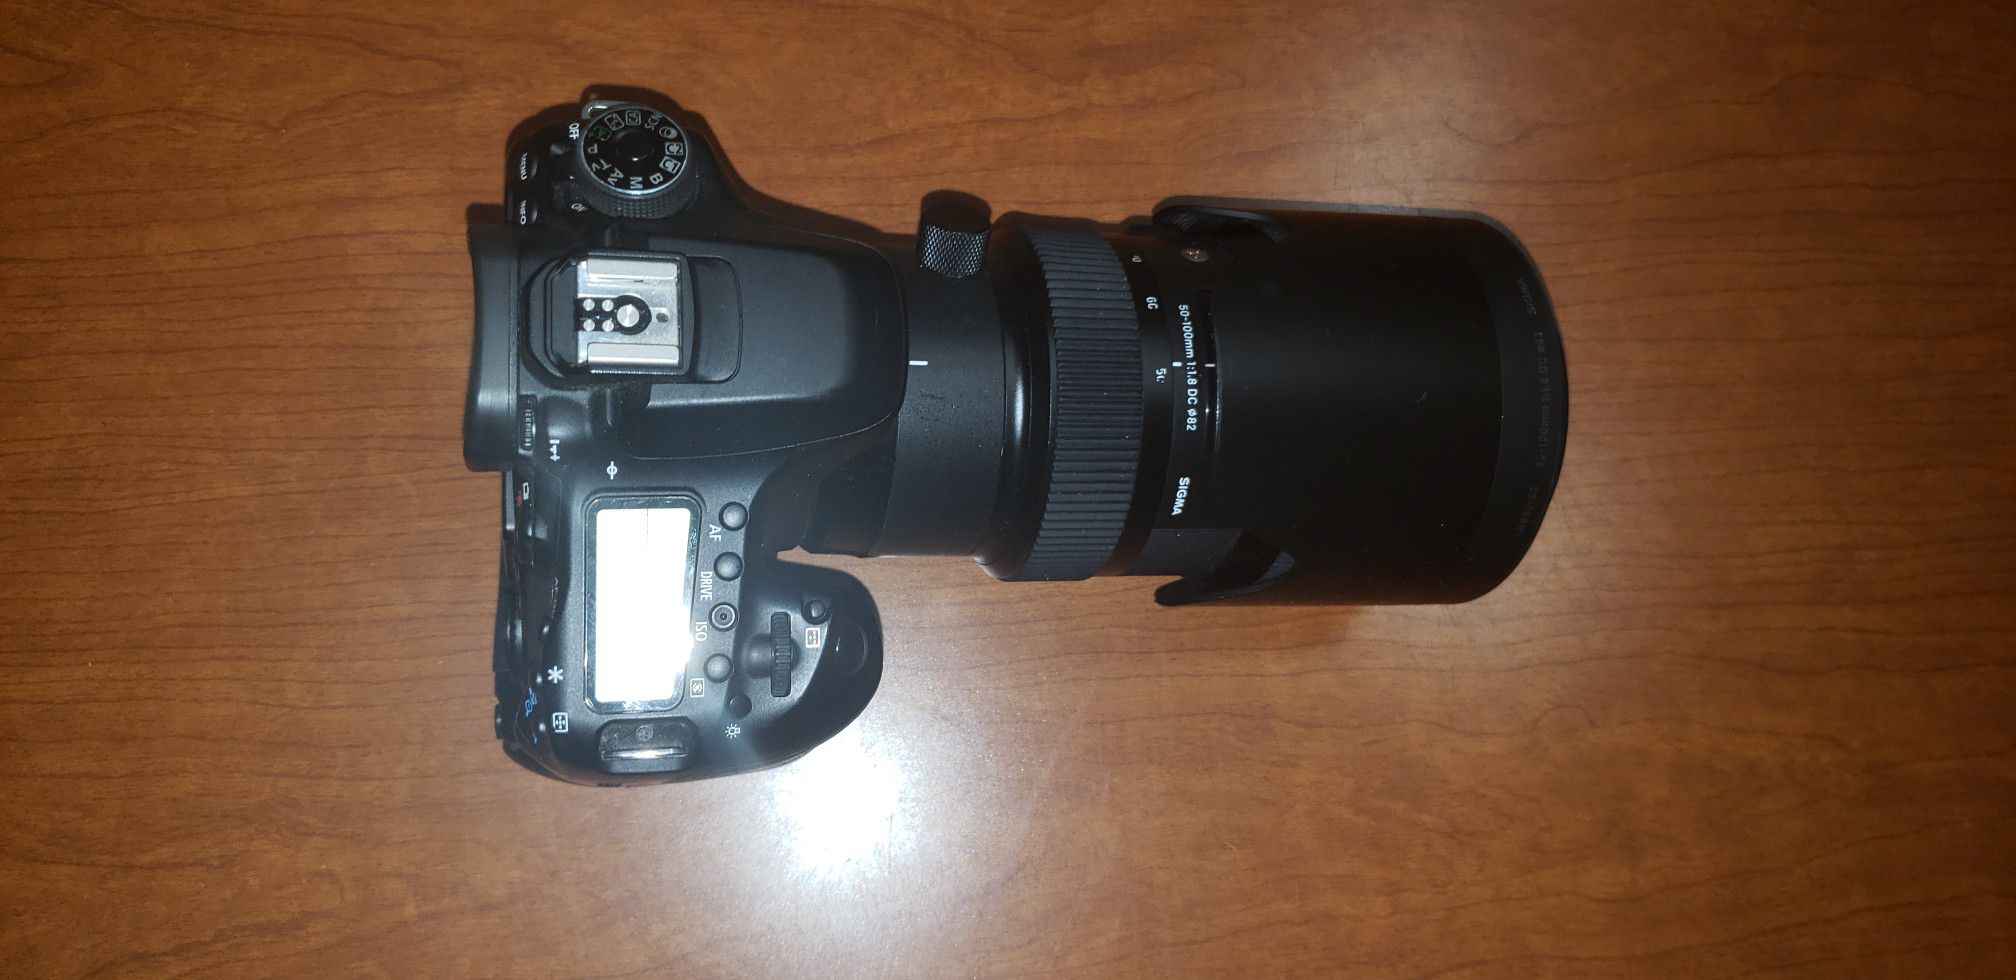 Canon 80D with Sigma 50-100mm f/1.8 with Lens Bundle